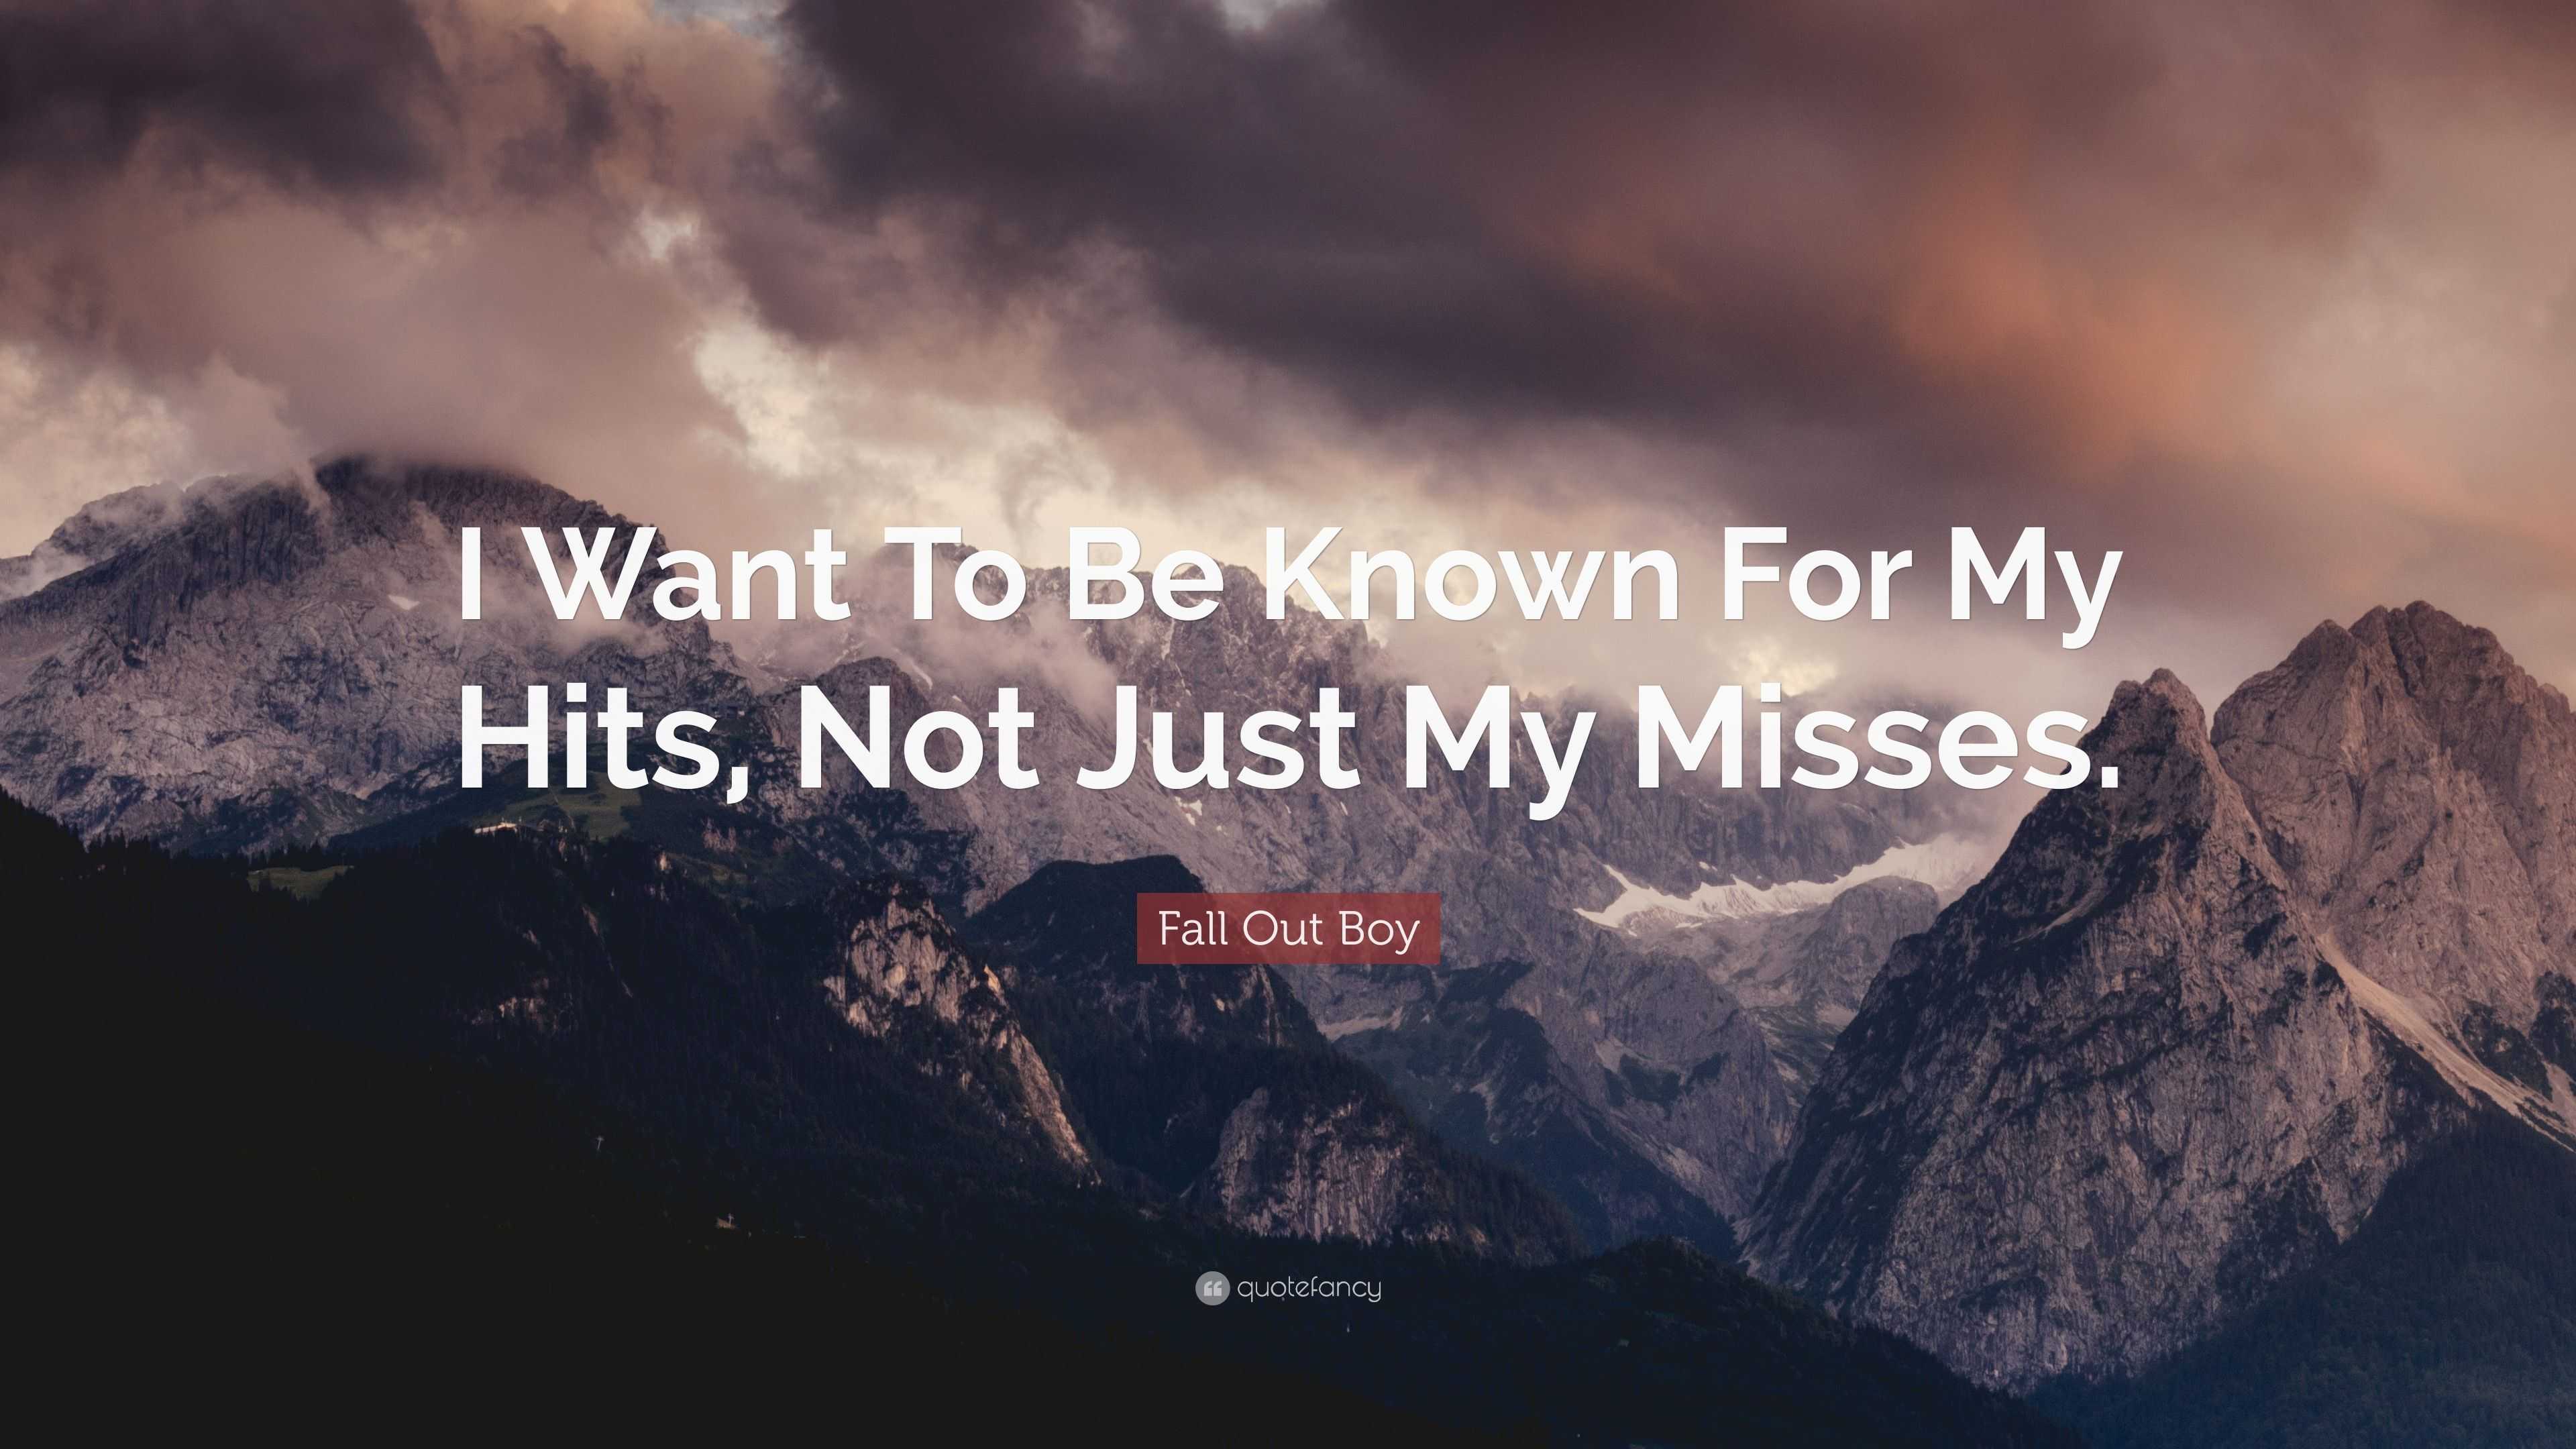 Fall Out Boy Quote “i Want To Be Known For My Hits Not Just My Misses”